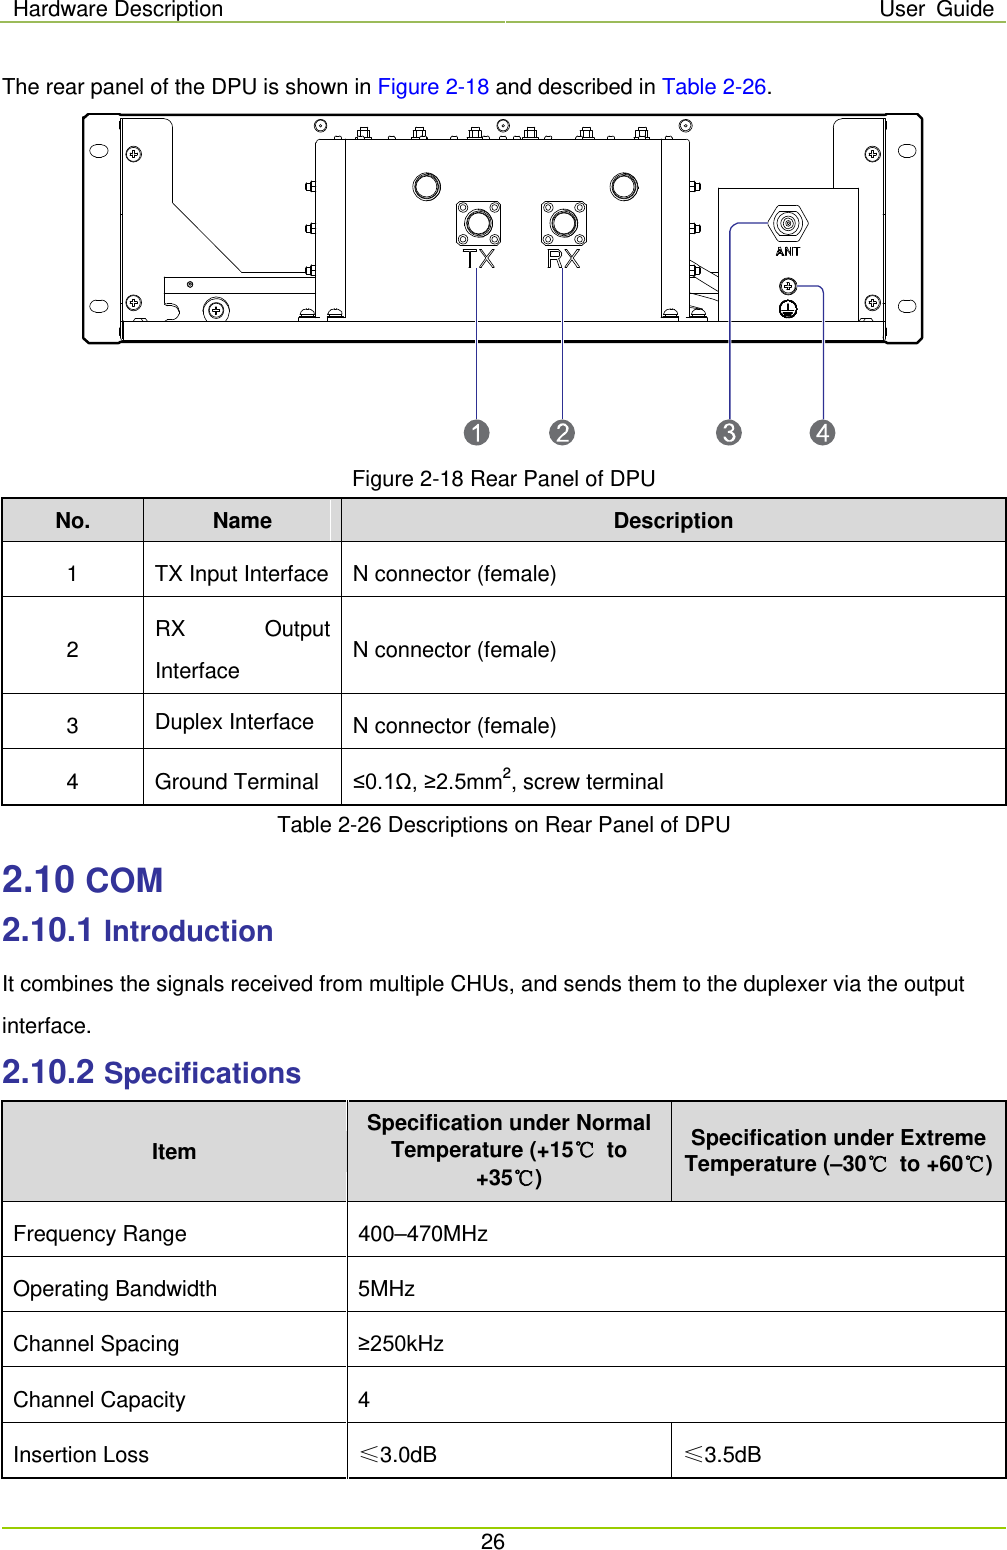 Hardware Description User Guide  26  The rear panel of the DPU is shown in Figure 2-18 and described in Table 2-26.    Figure 2-18 Rear Panel of DPU No. Name Description 1  TX Input Interface N connector (female) 2 RX Output Interface N connector (female) 3  Duplex Interface N connector (female) 4  Ground Terminal ≤0.1Ω, ≥2.5mm2, screw terminal Table 2-26 Descriptions on Rear Panel of DPU 2.10 COM 2.10.1 Introduction It combines the signals received from multiple CHUs, and sends them to the duplexer via the output interface. 2.10.2 Specifications Item Specification under Normal Temperature (+15℃ to +35℃) Specification under Extreme Temperature (–30℃ to +60℃) Frequency Range 400–470MHz Operating Bandwidth 5MHz Channel Spacing ≥250kHz Channel Capacity  4 Insertion Loss ≤3.0dB ≤3.5dB 